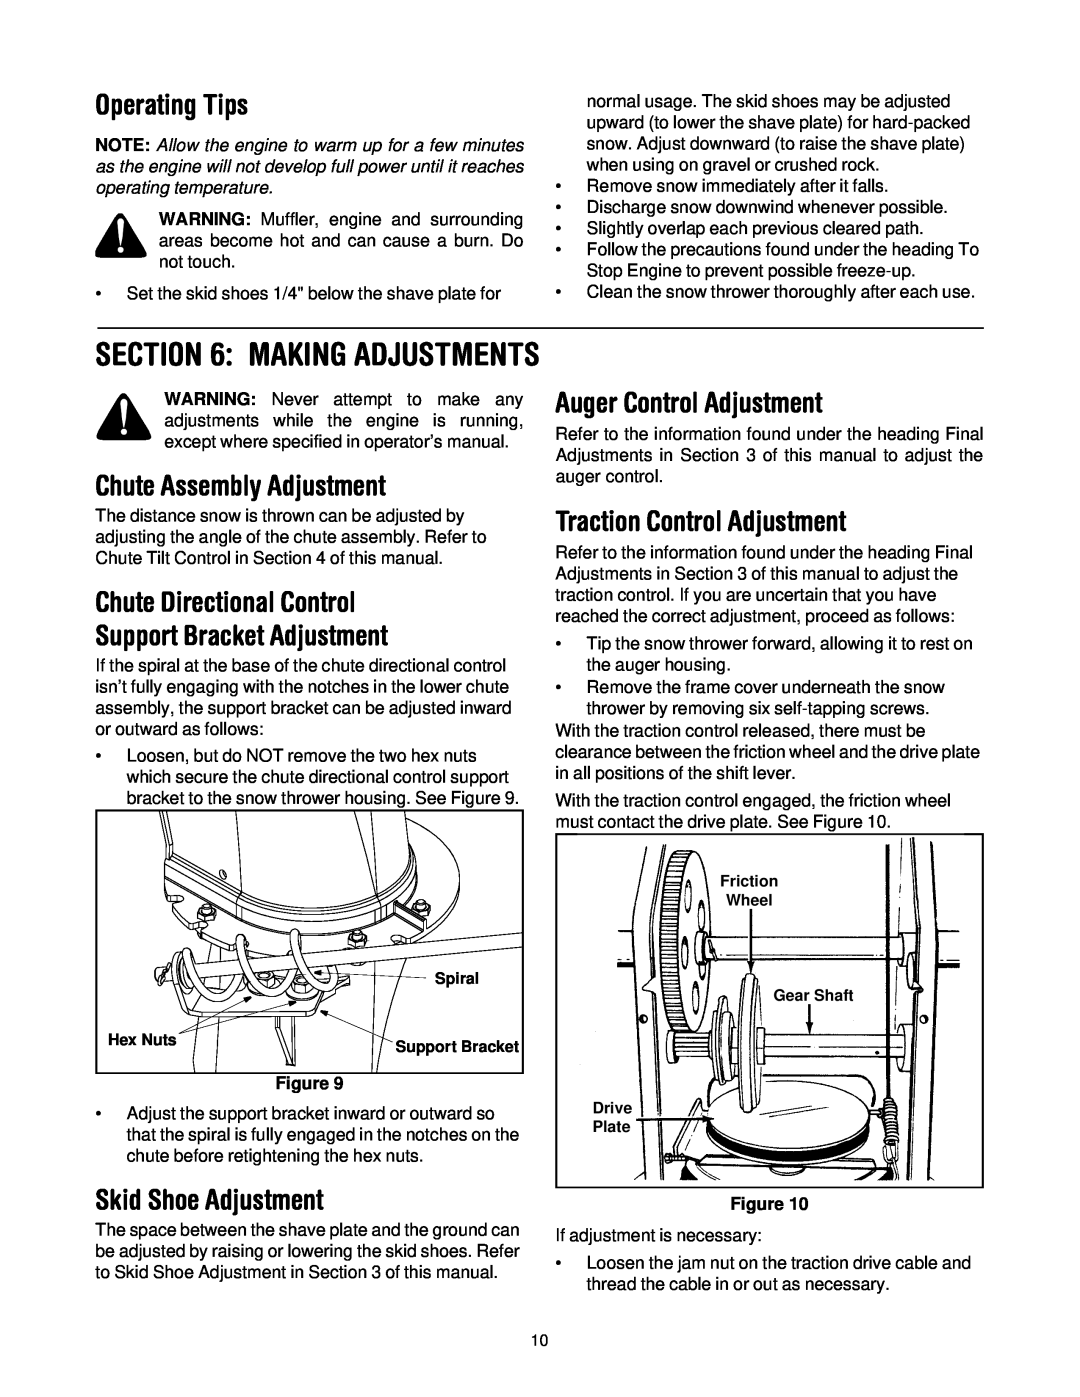 Cub Cadet 522 WE manual Operating Tips, Chute Assembly Adjustment, Chute Directional Control Support Bracket Adjustment 